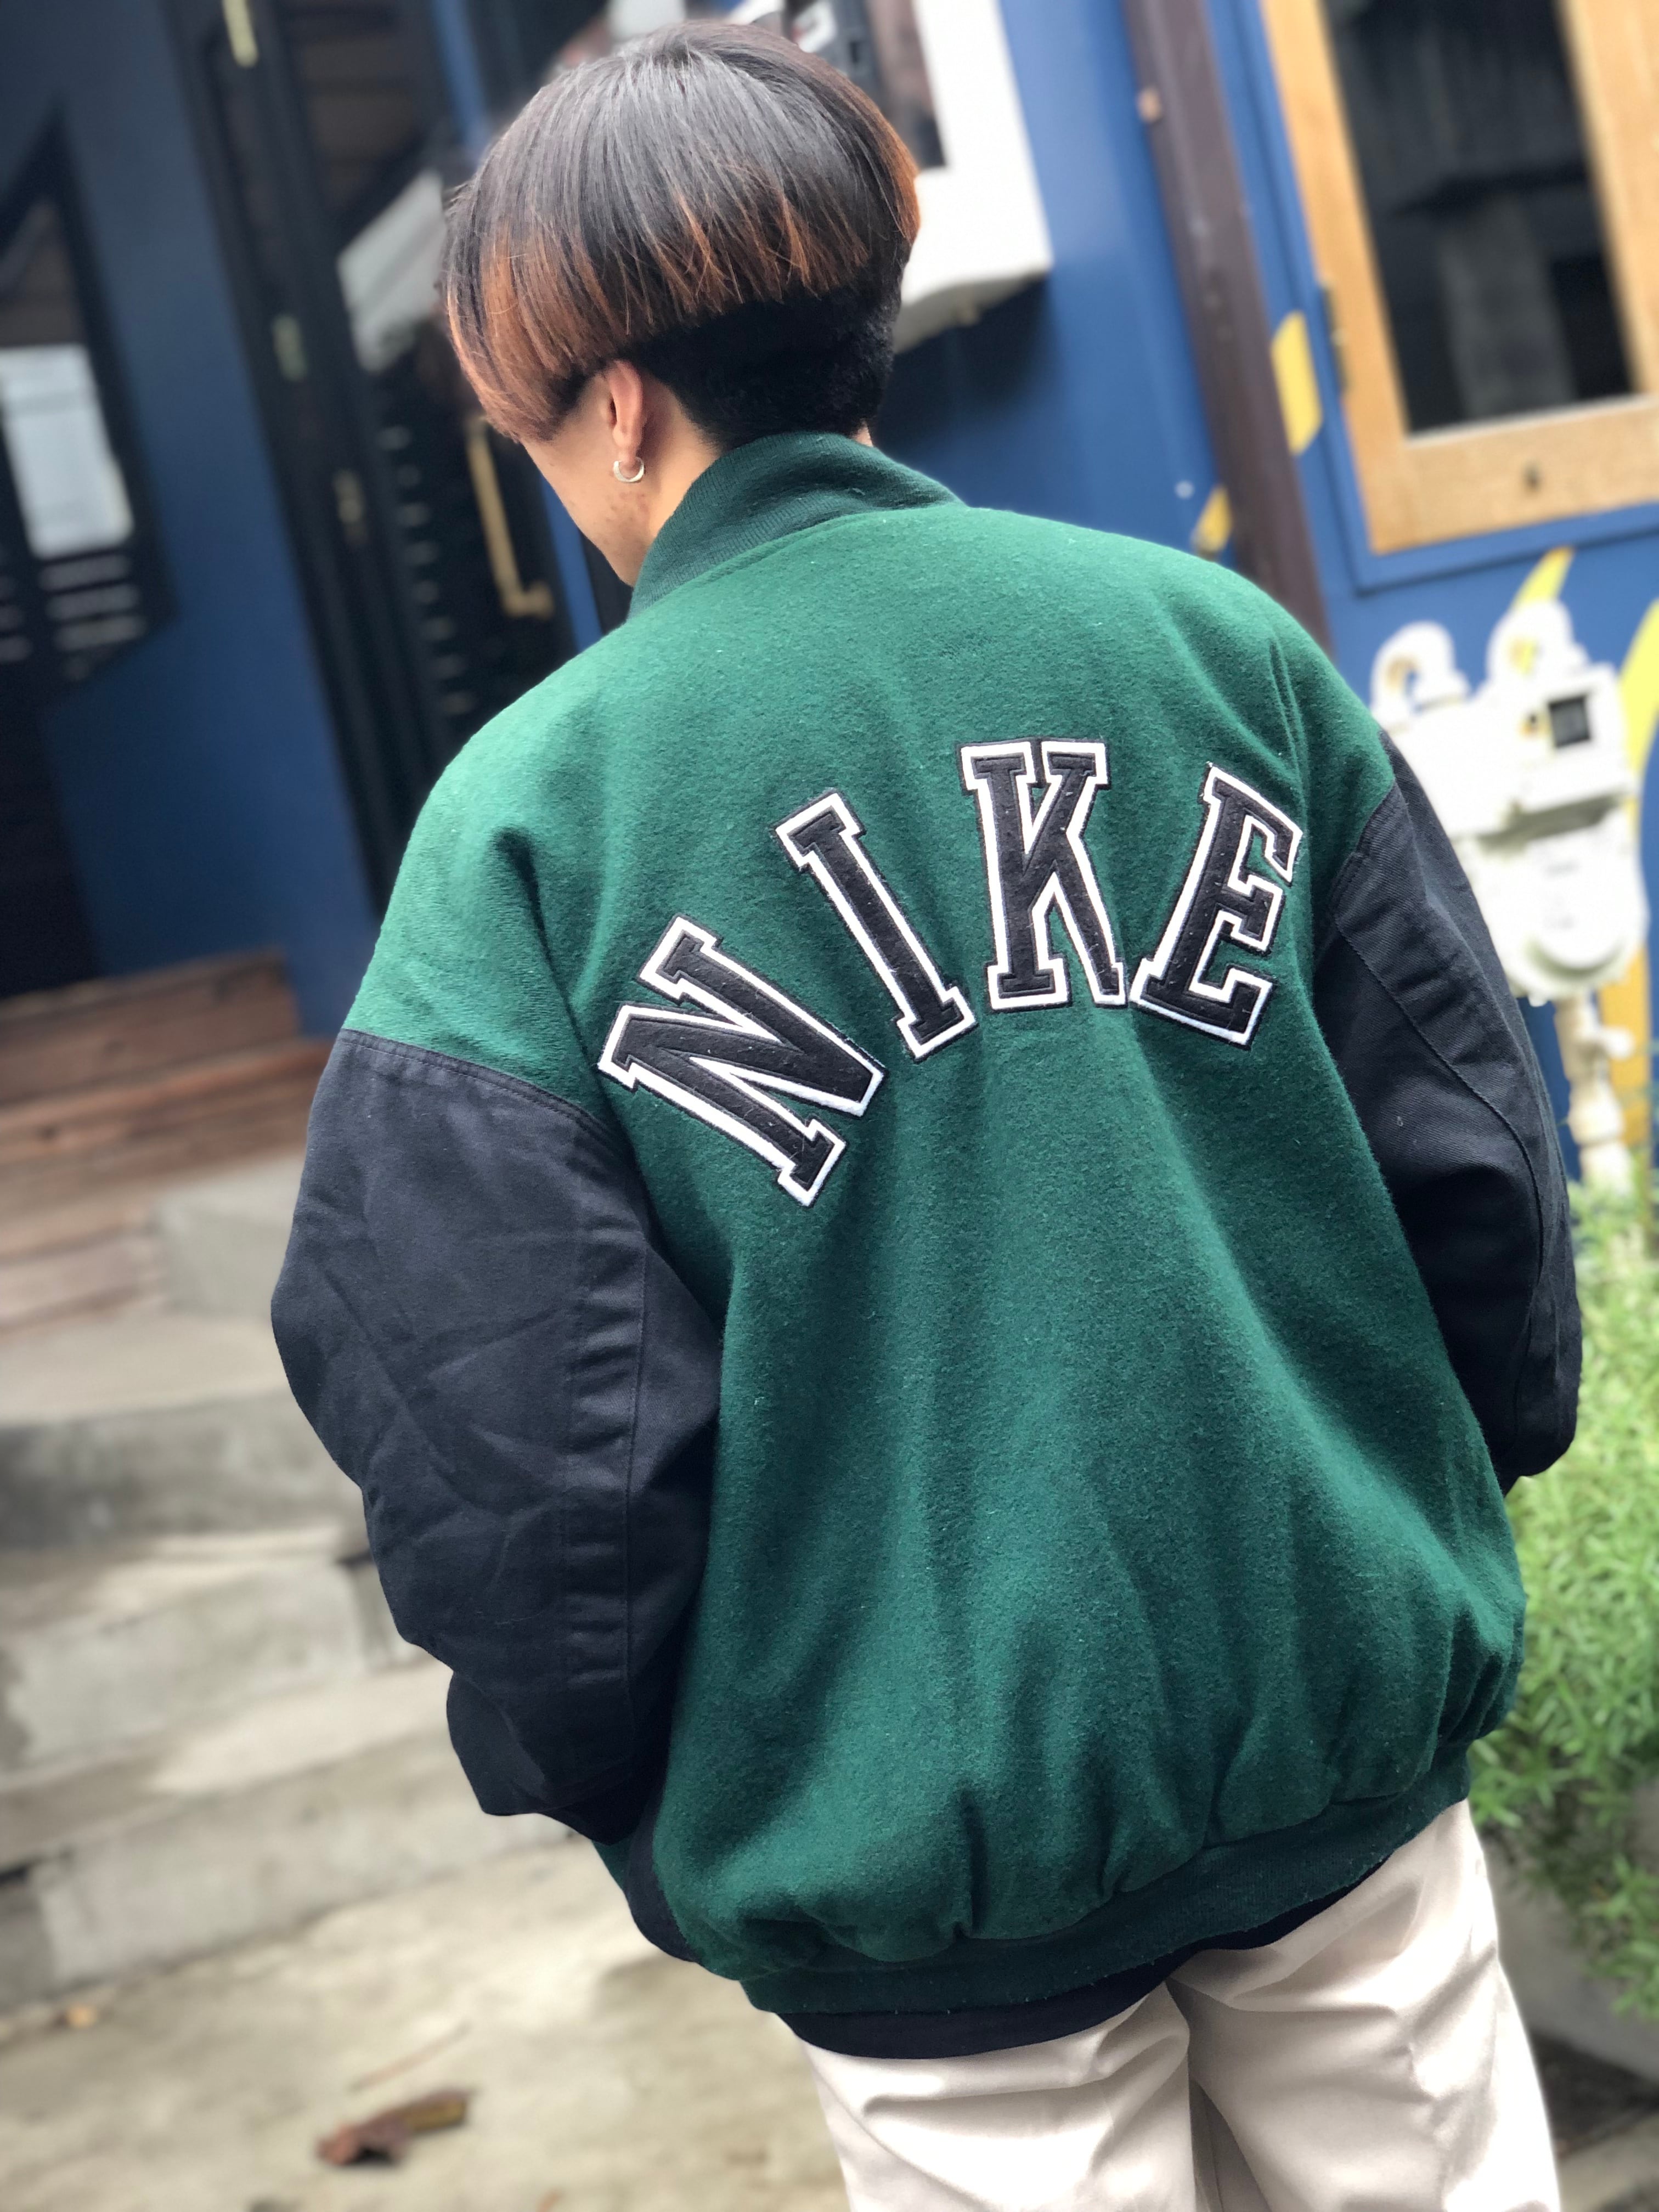 90s NIKE wool × cotton stadium jacket | What’z up powered by BASE